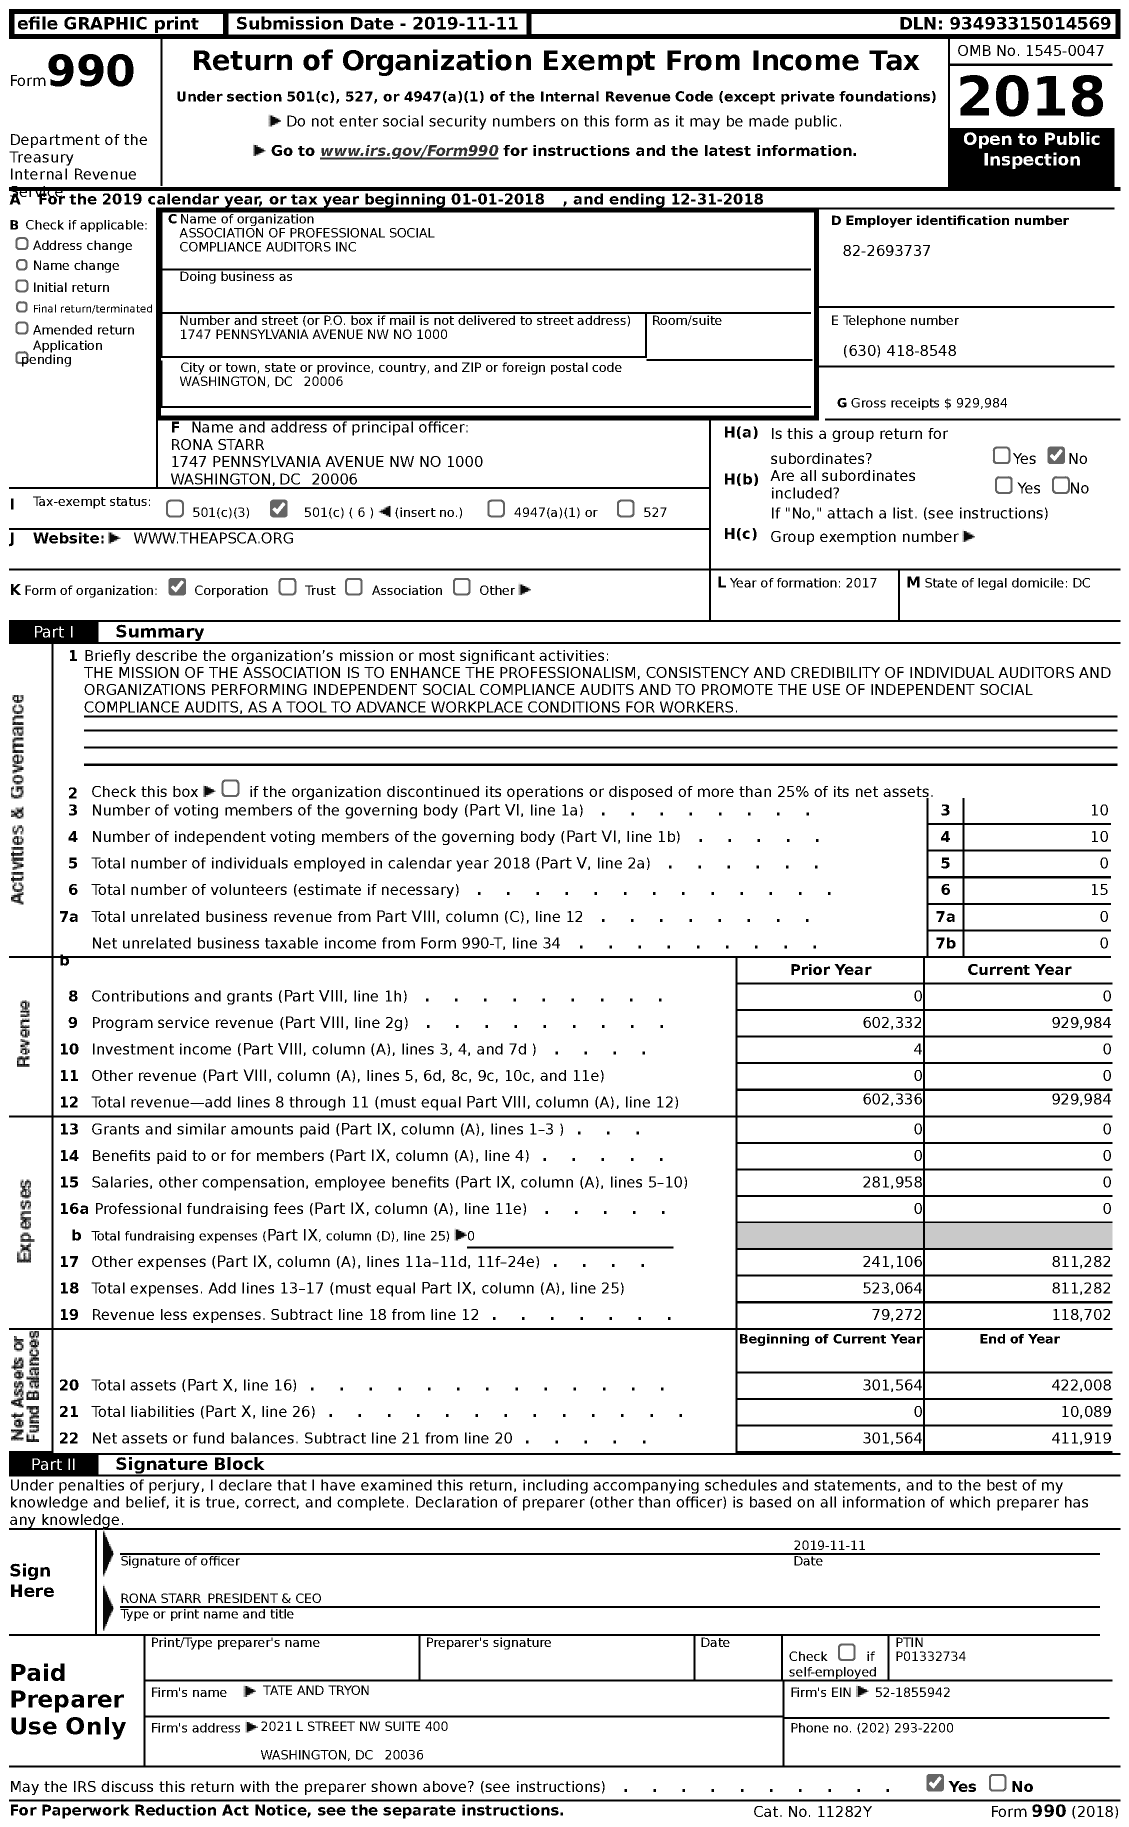 Image of first page of 2018 Form 990 for Association of Professional Social Compliance Auditors